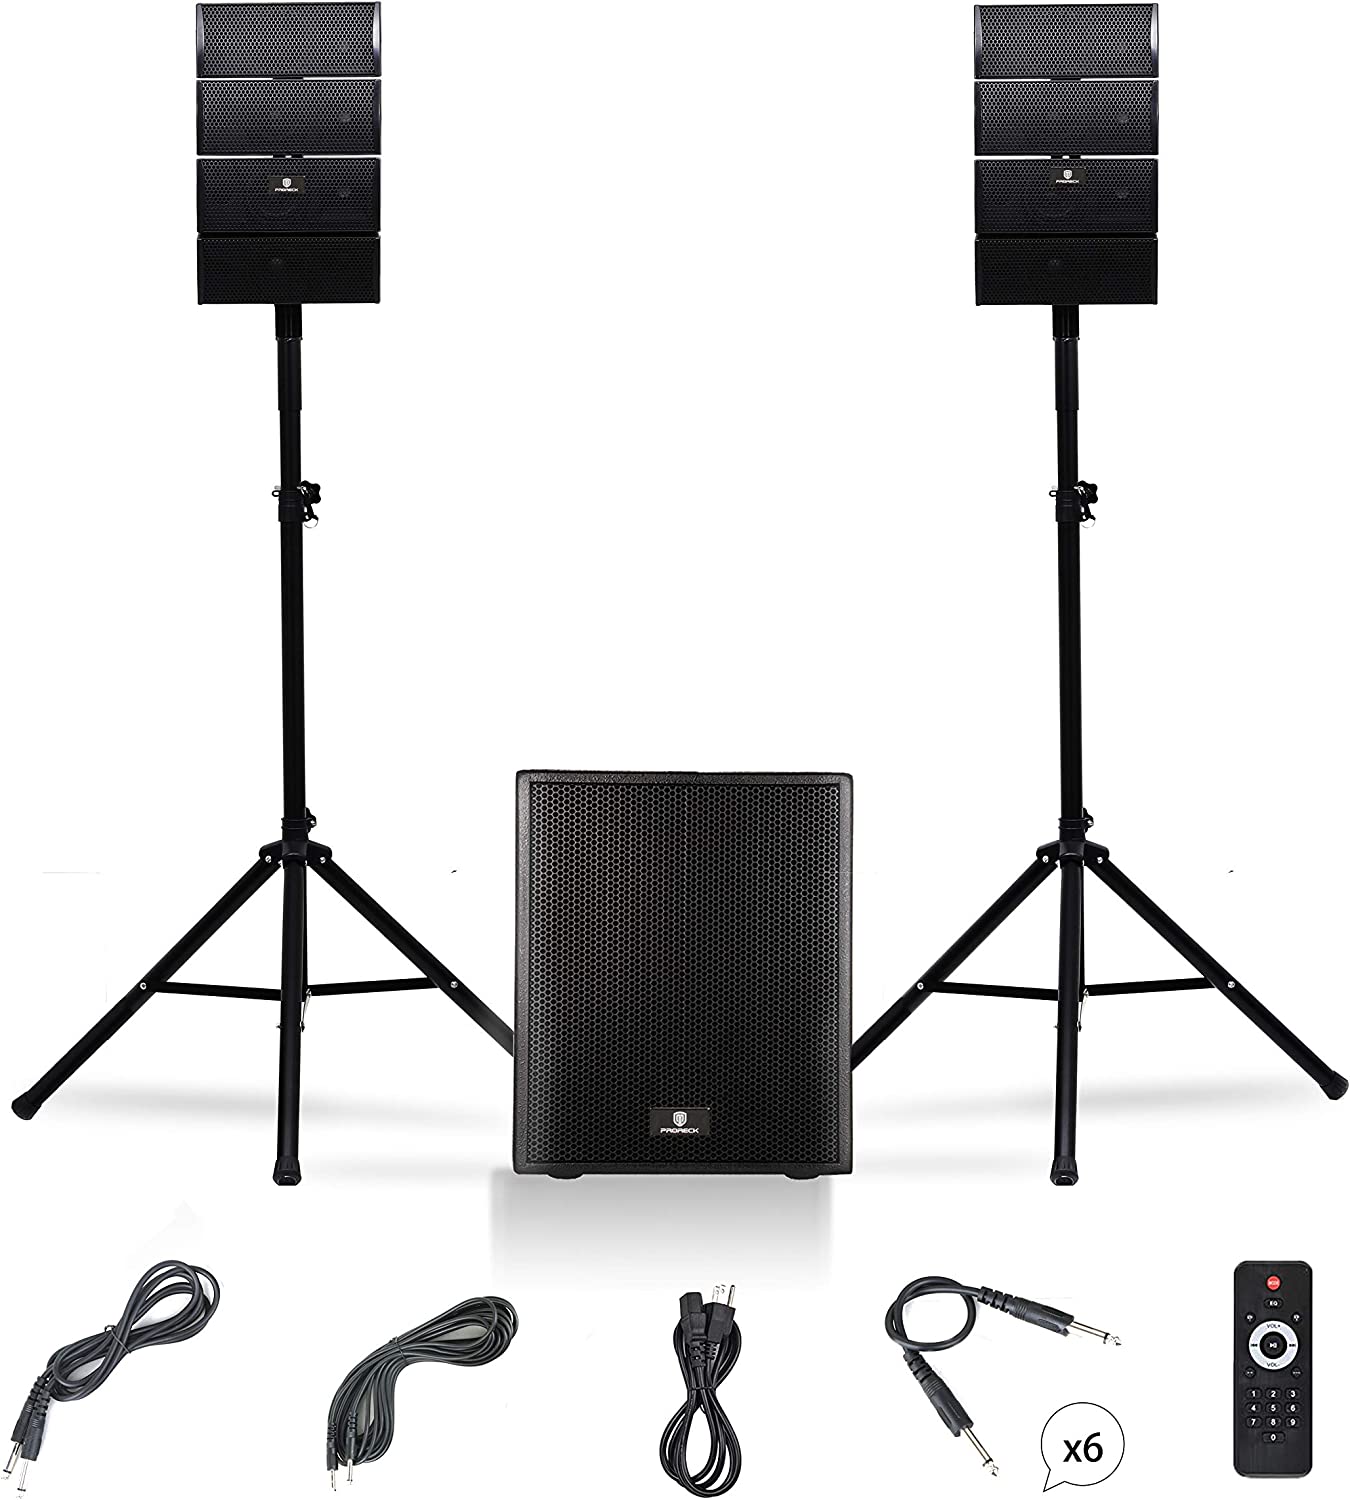 Proreck Club AB|Party speaker pa speakers |Proreck Speakers Proreck Club 3000